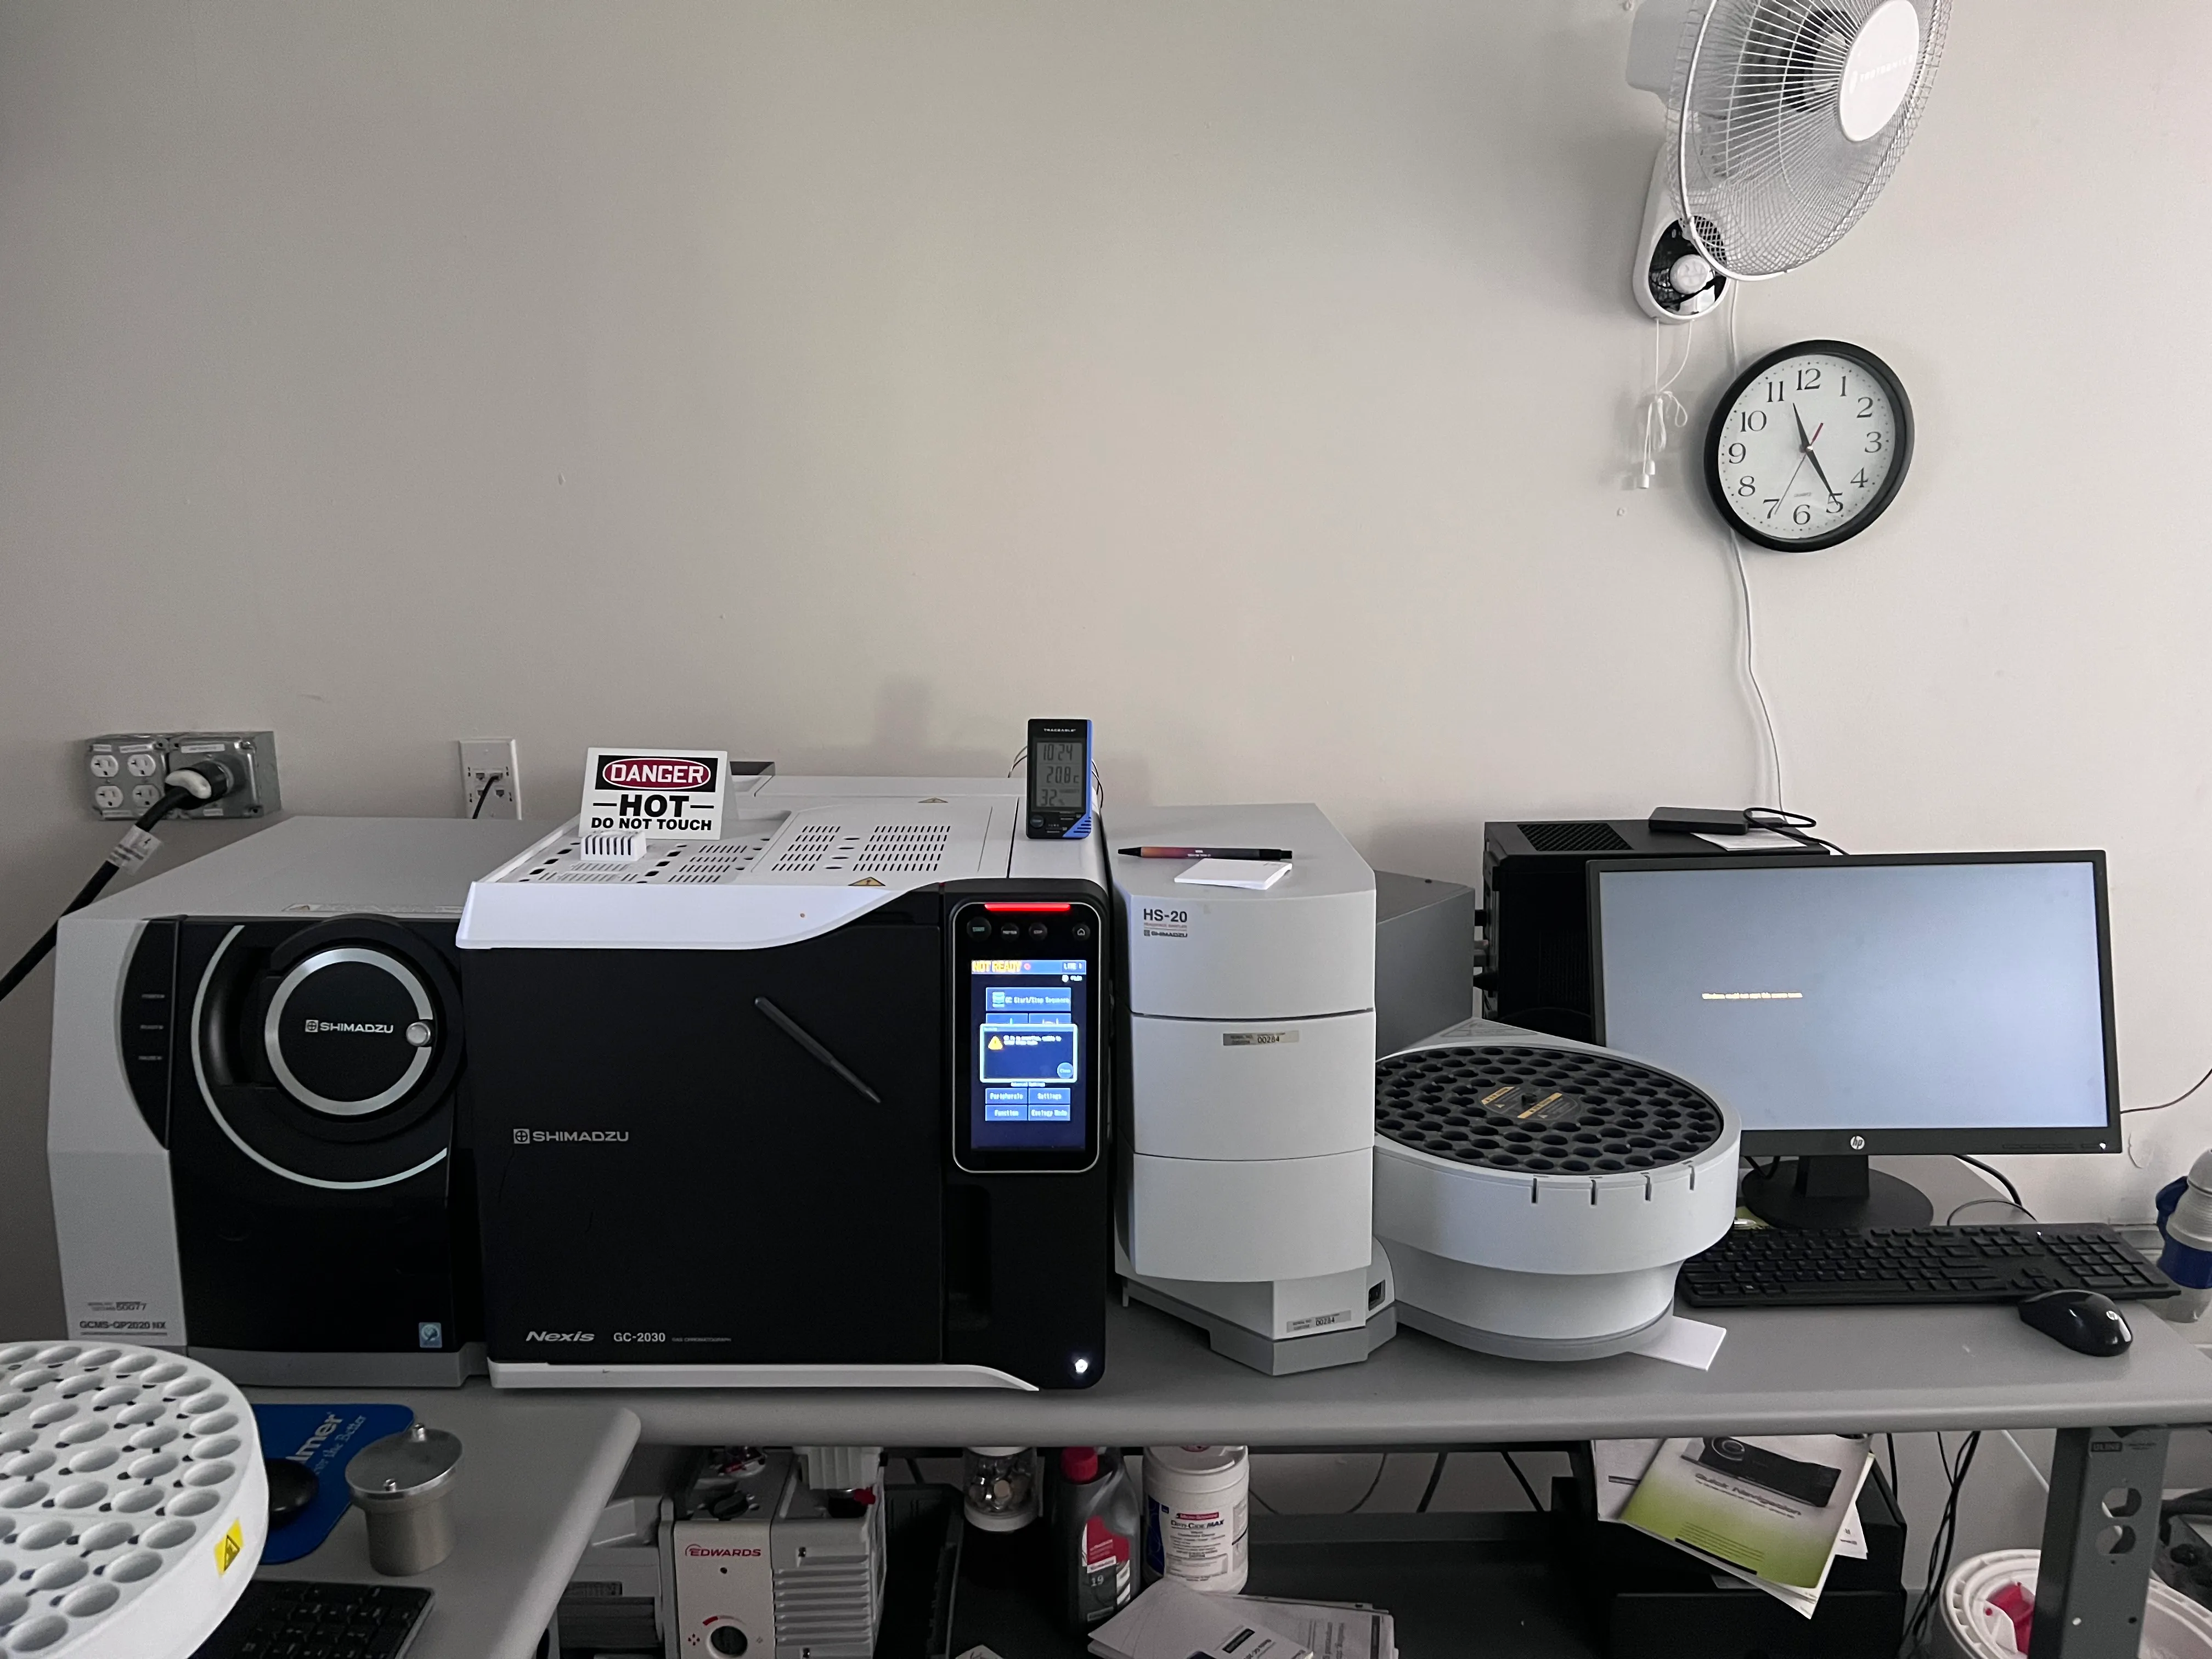 Shimadzu Nexis GC-2030/MS and Headspace Autosampler